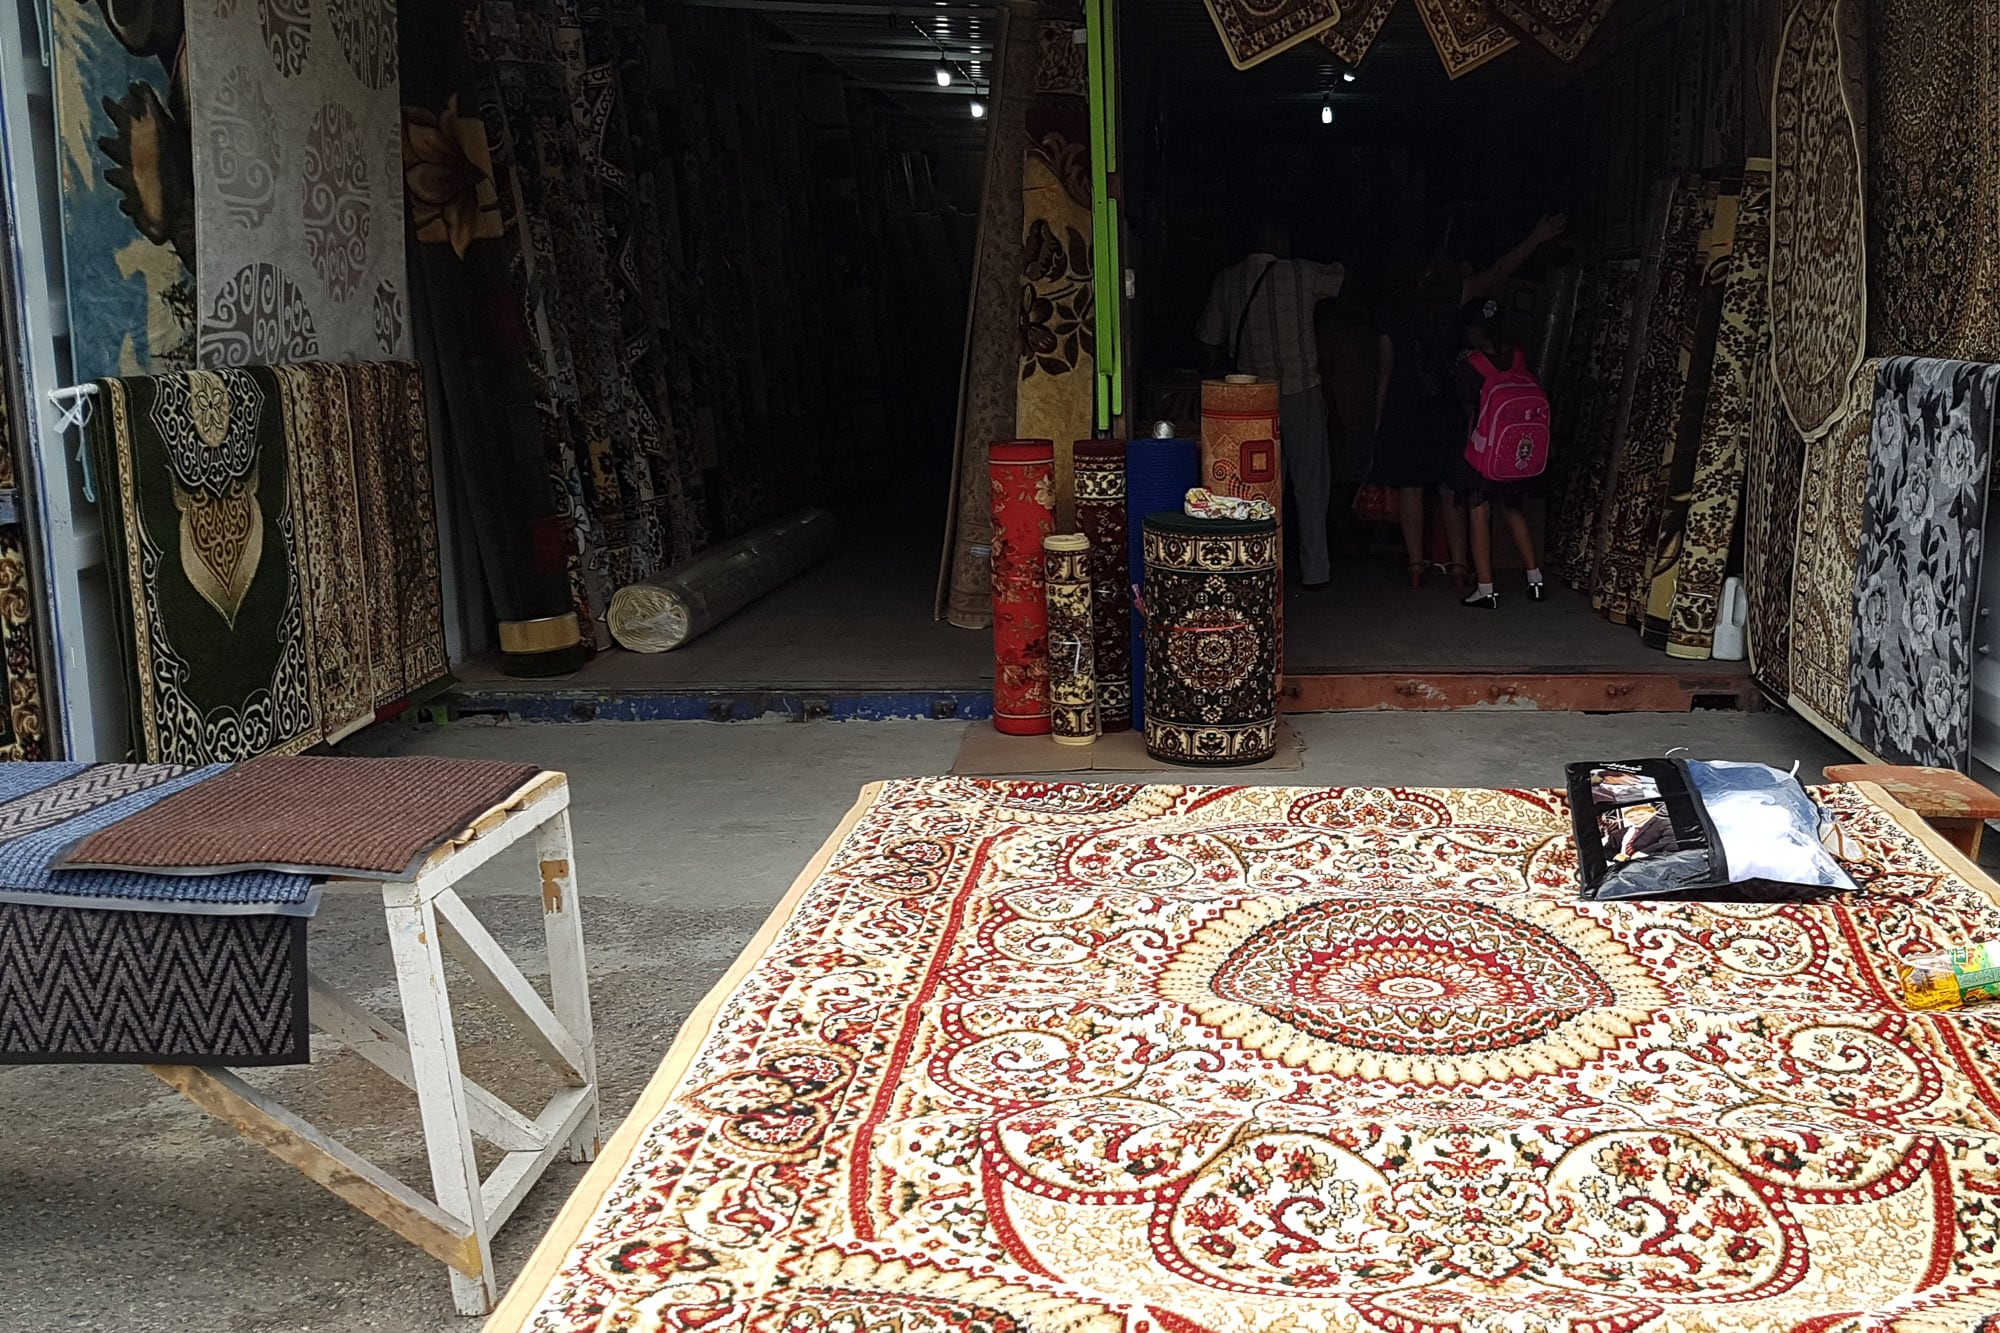 rug store